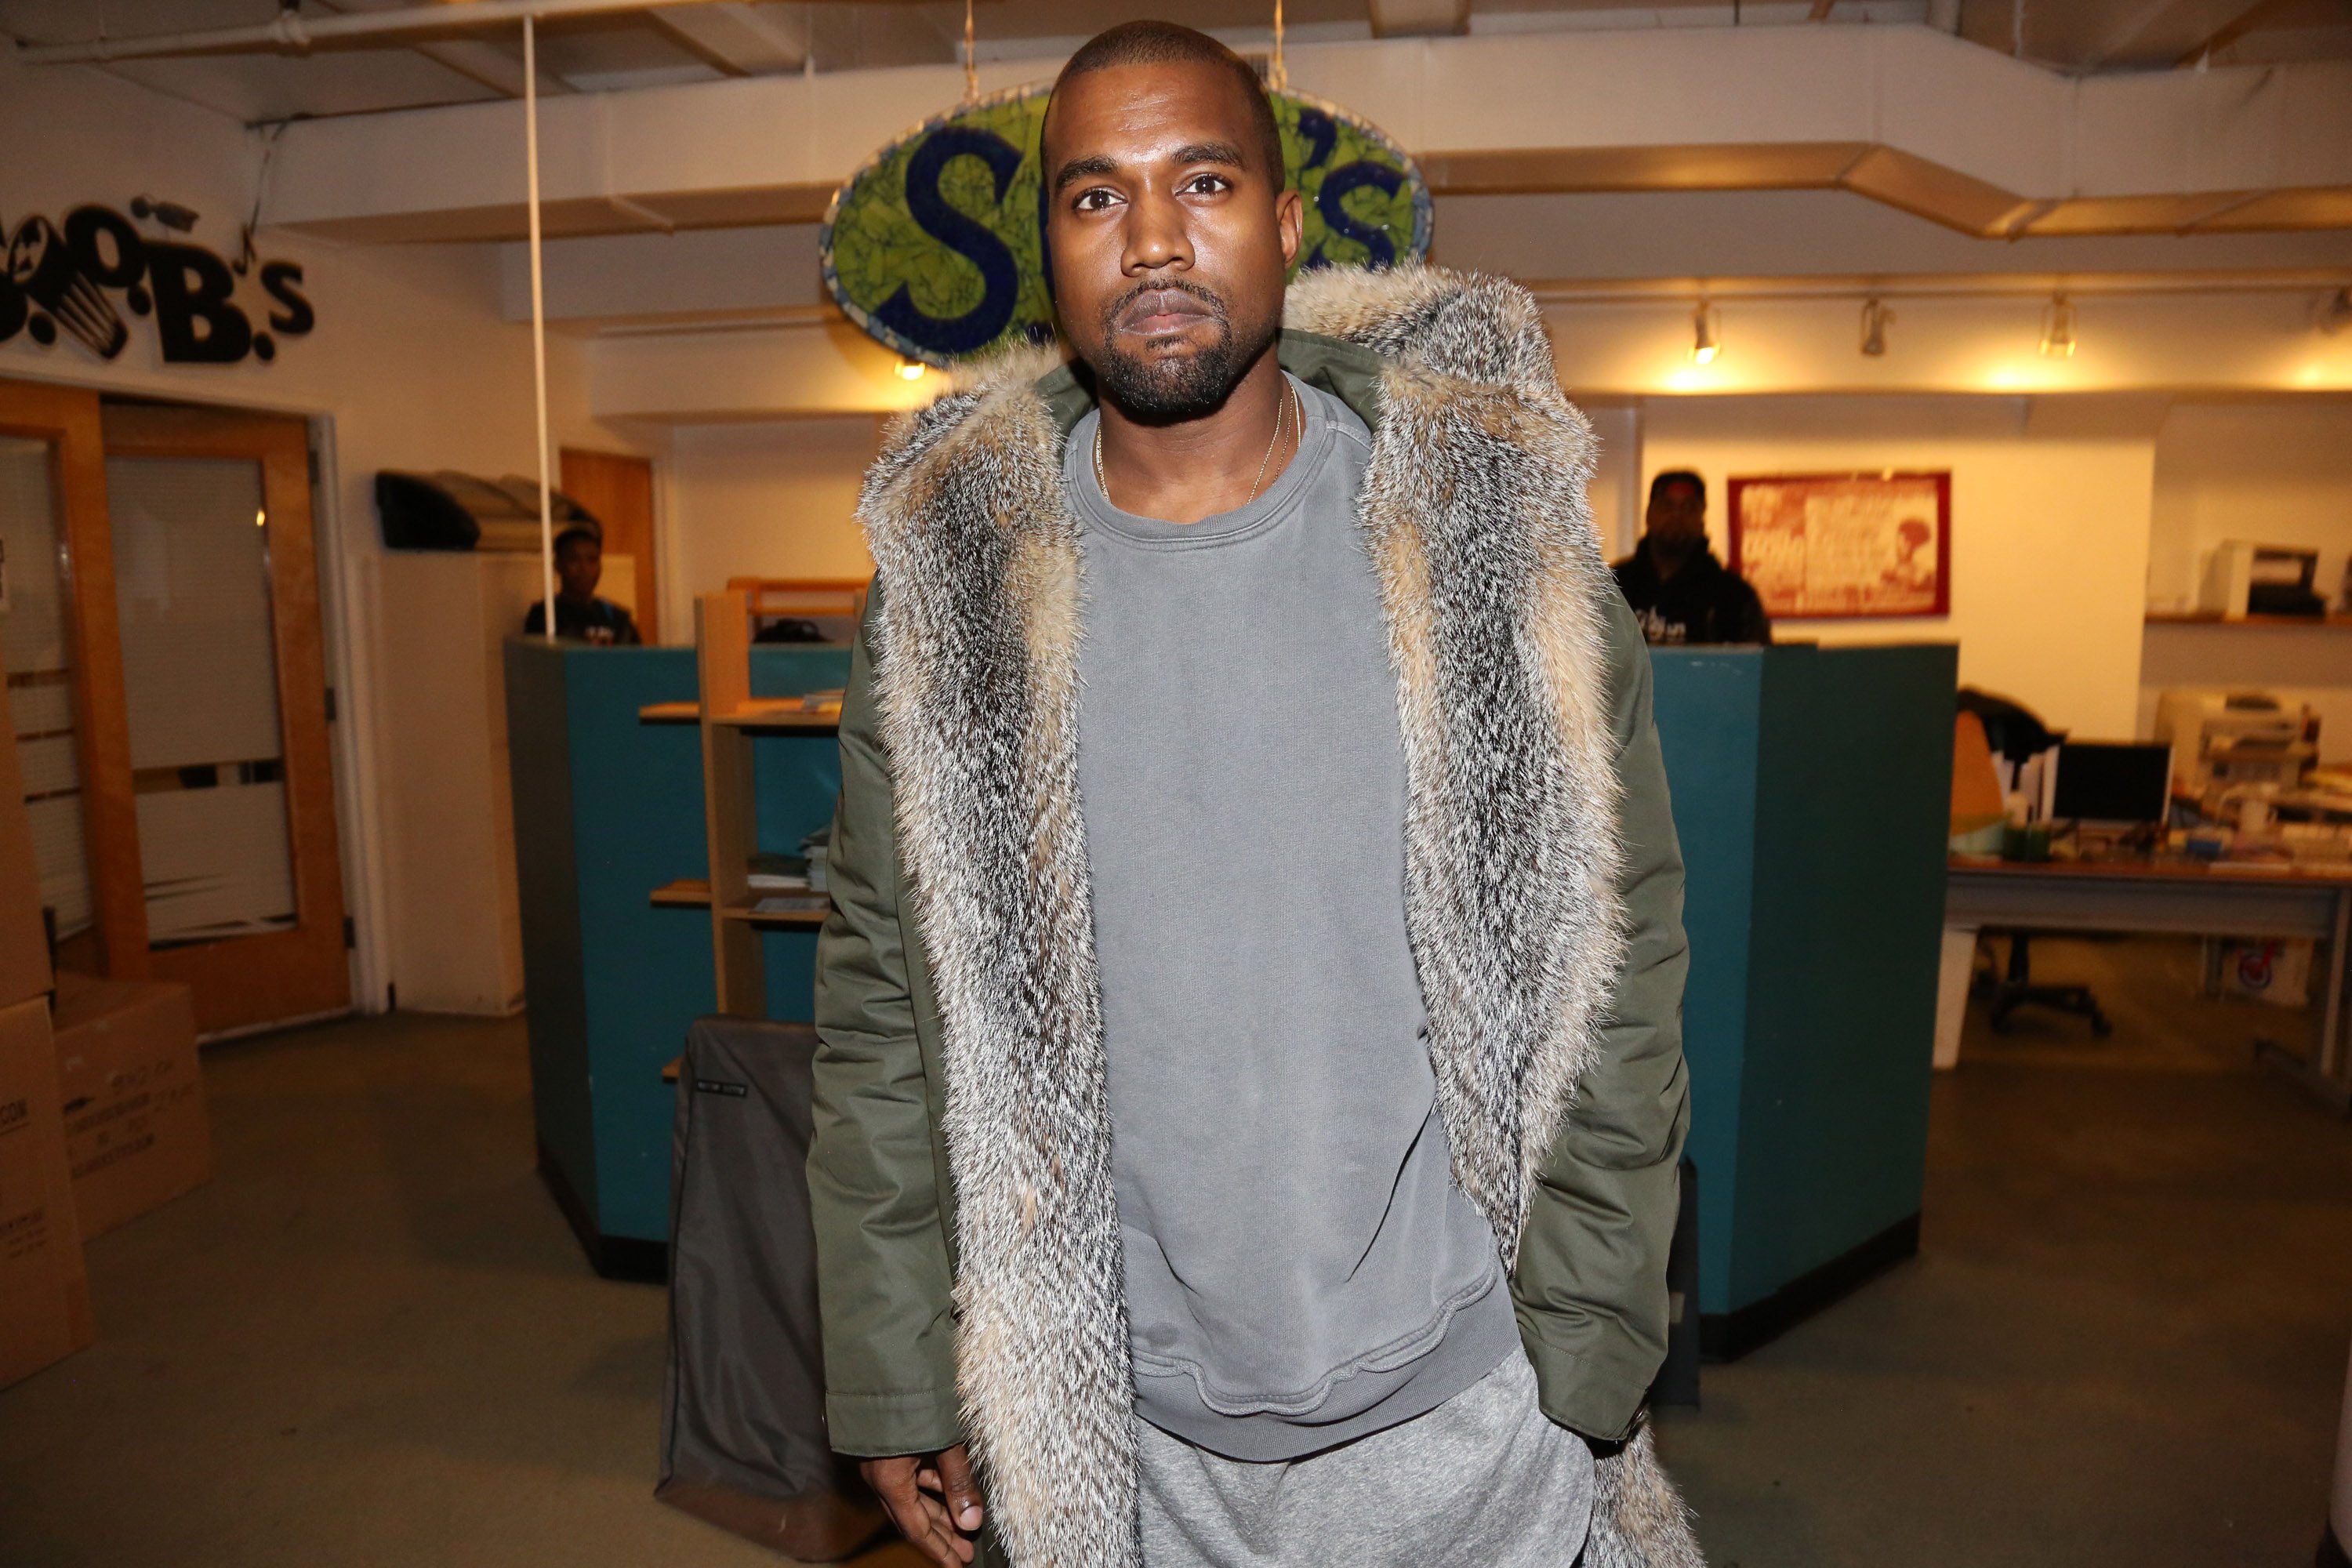 Kanye West attends SOB's on December 4, 2014, in New York. | Source: Getty Images